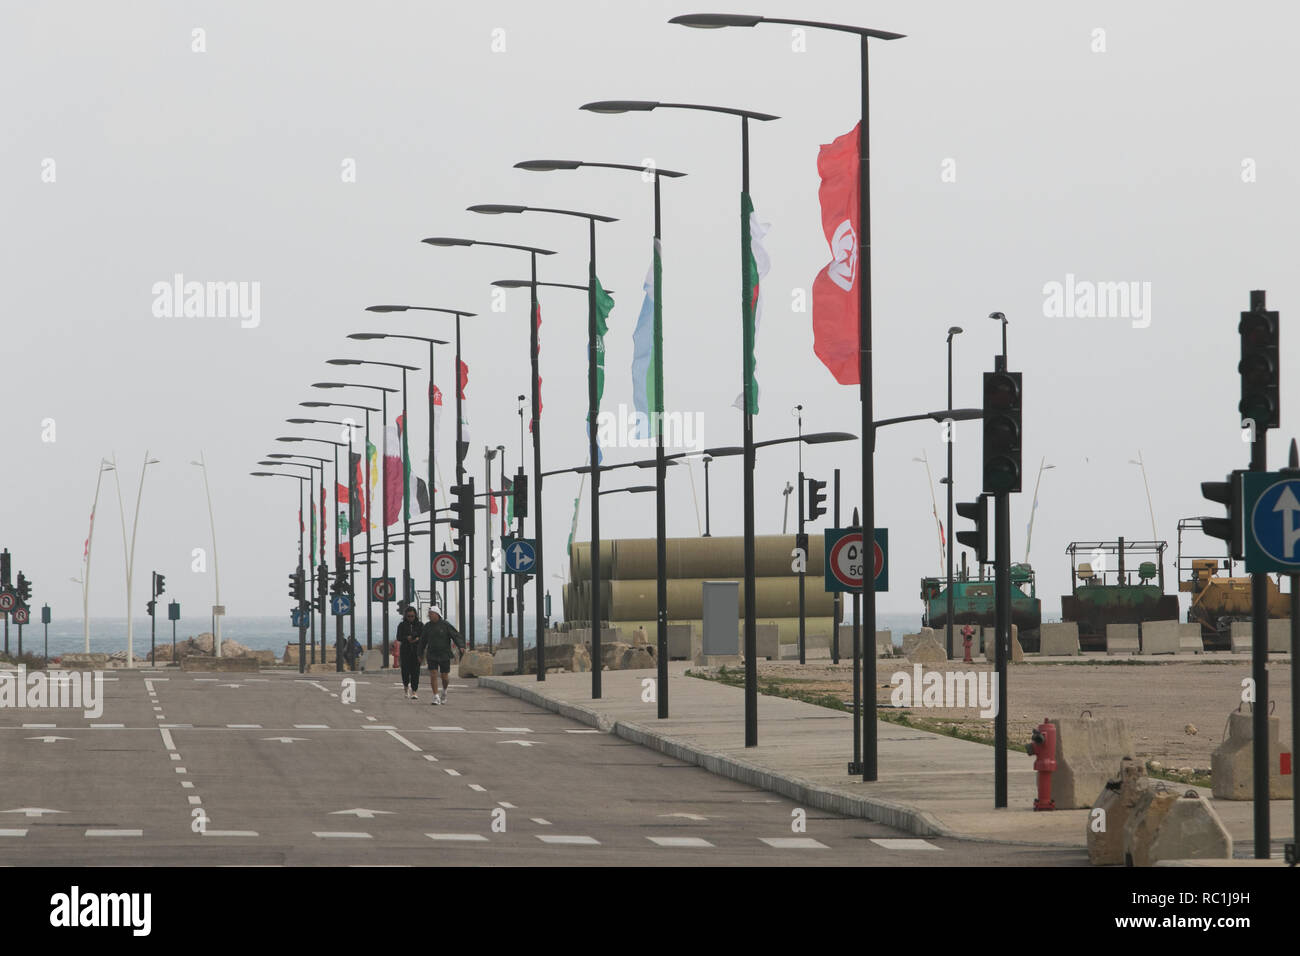 Beirut Lebanon. 13th January 2019. The national flags of Arab nations are displayed as  Beirut prepares to  host the  Arab Economic and Social Development Summit organized by the Arab League  which is scheduled to take place on Jan. 19 to 20  and is concerned primarily with developmental issues in the Arab world Credit: amer ghazzal/Alamy Live News Stock Photo